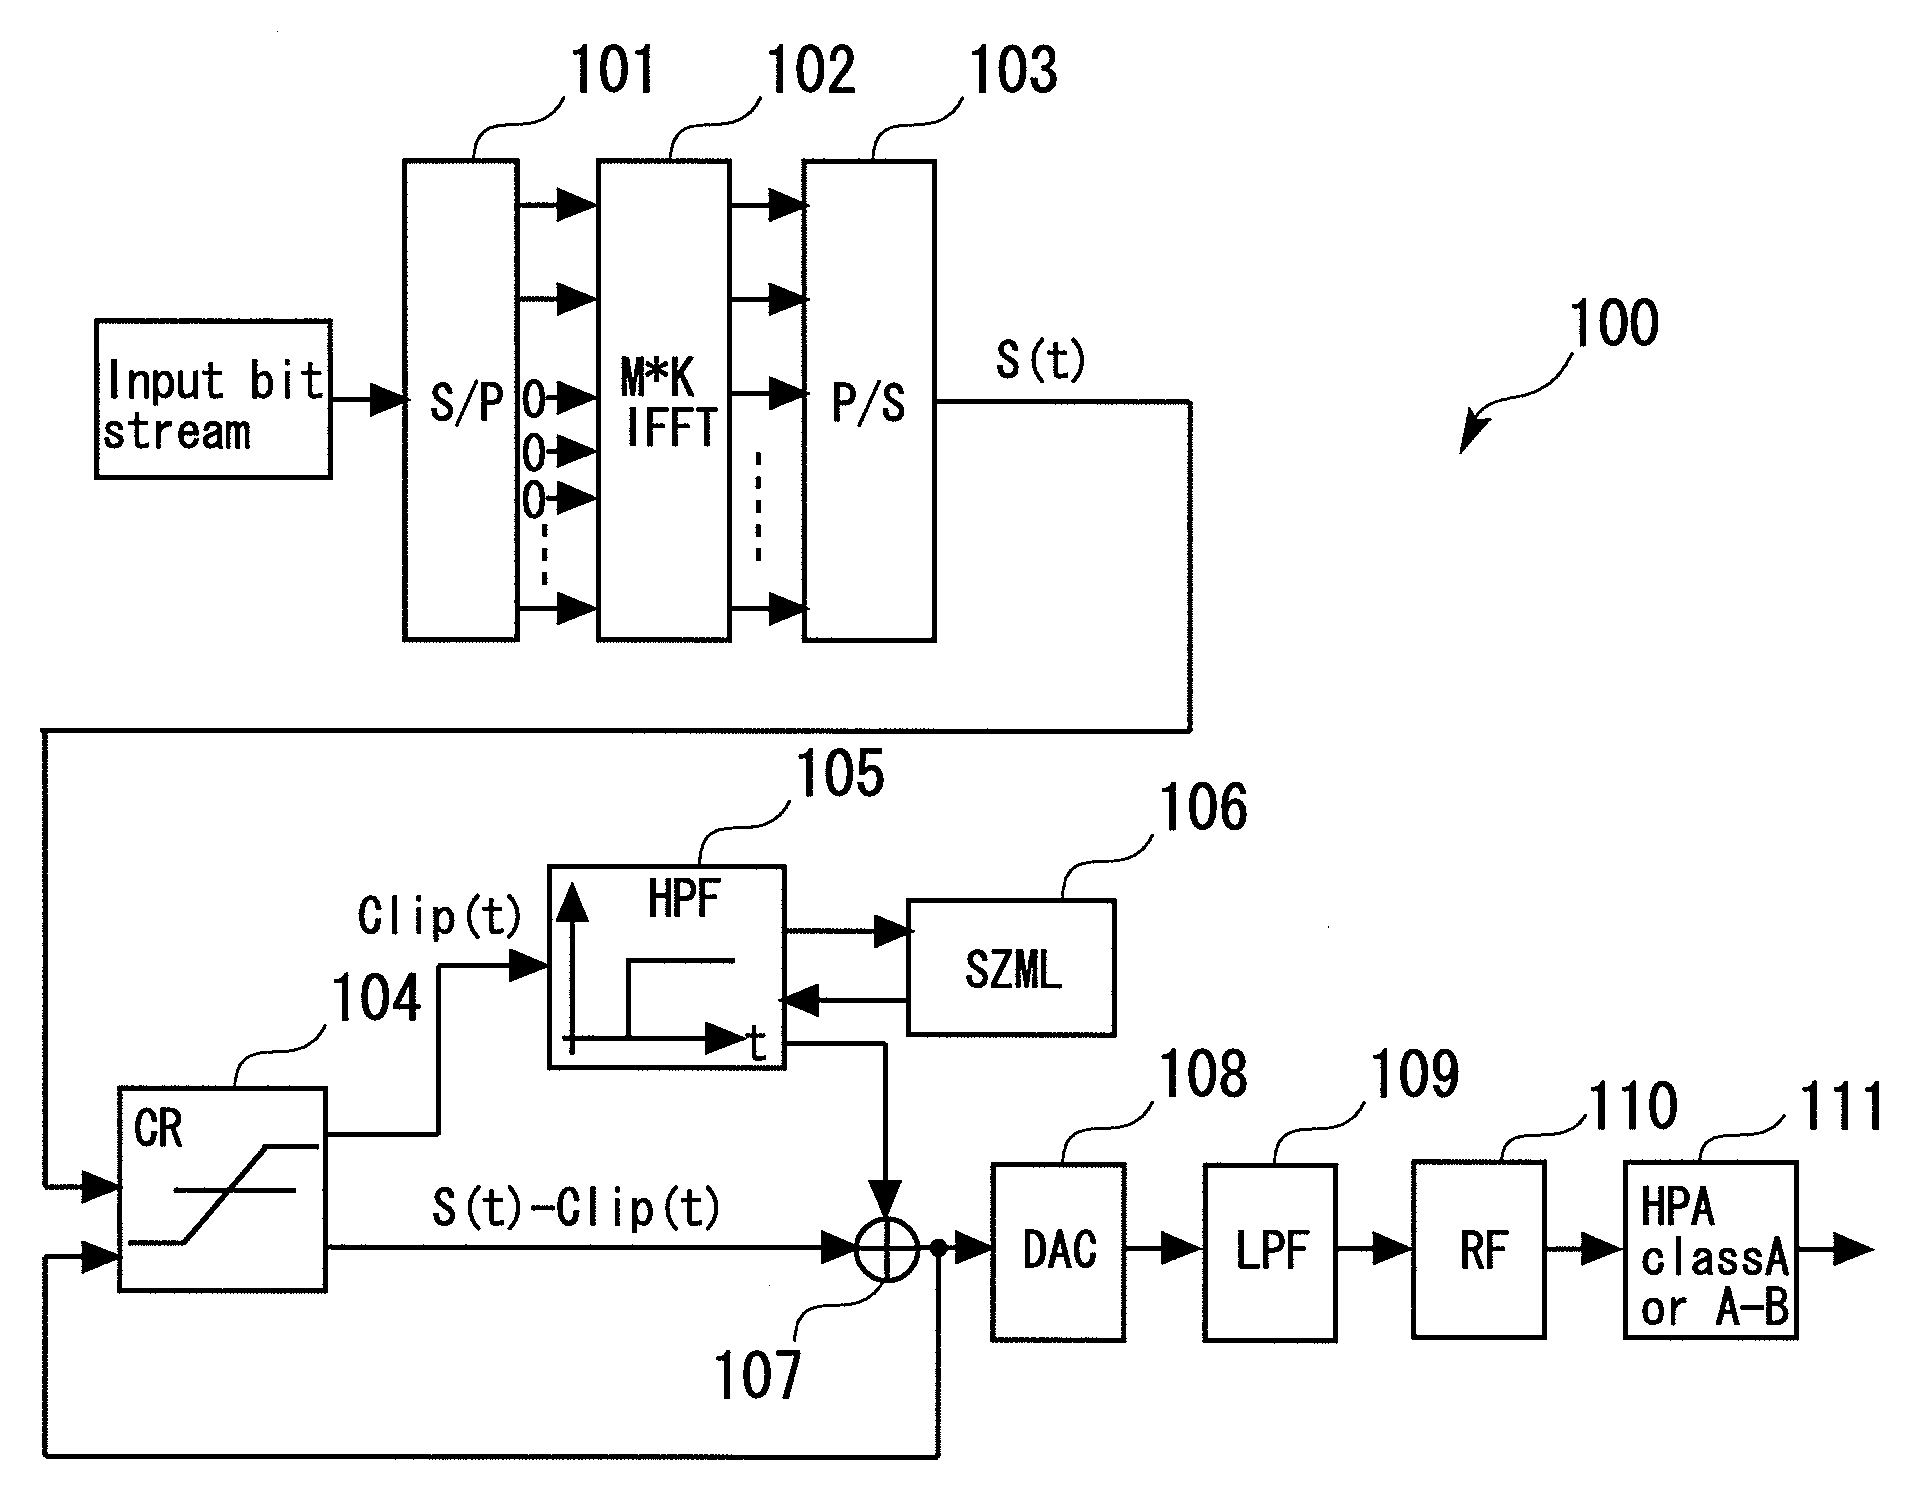 Transmitter for suppressing out-of-band power for a signal